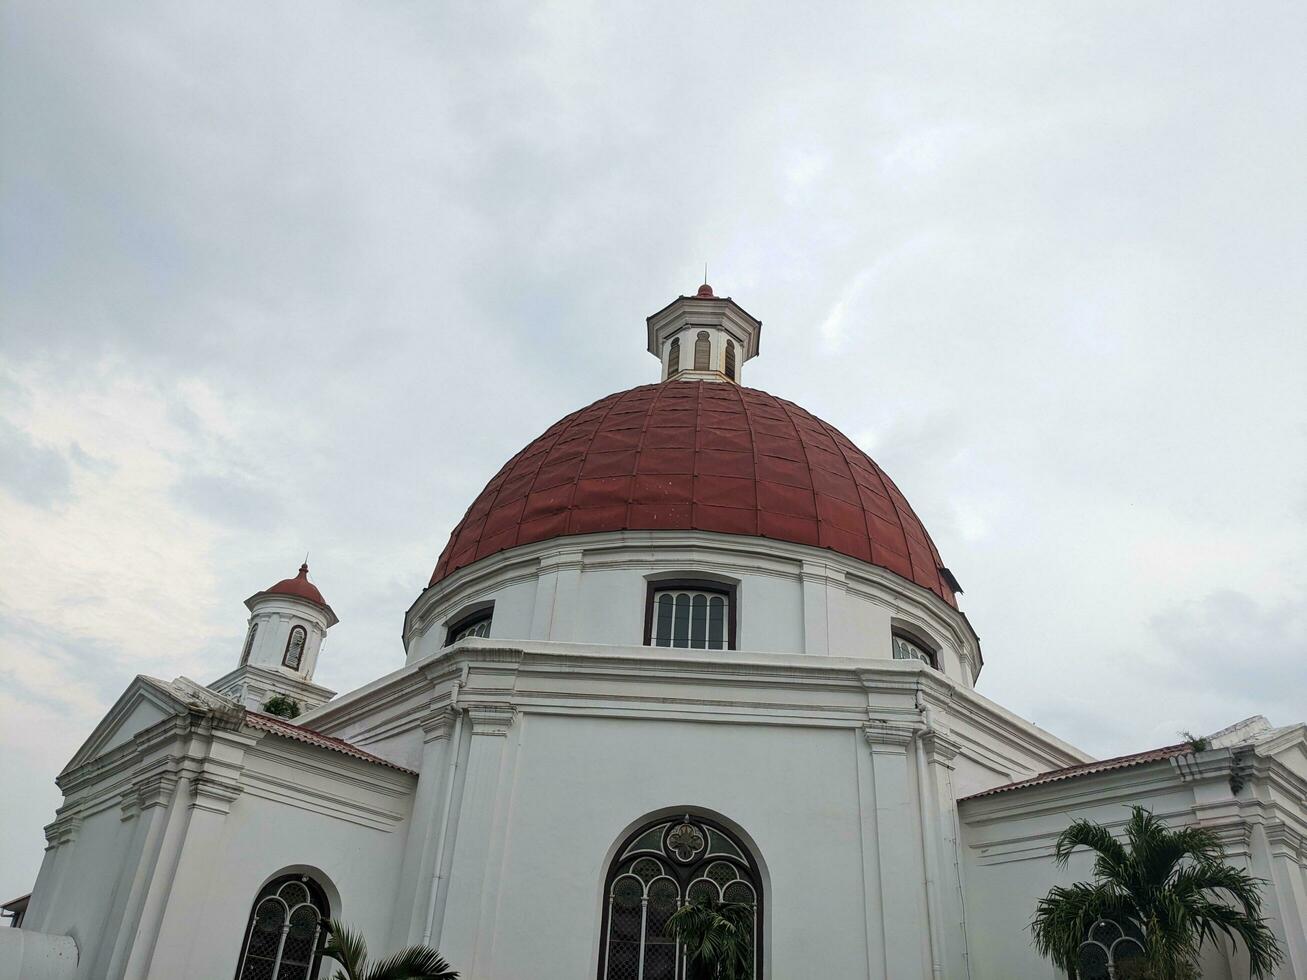 Cathedral of old town on Semarang Central Java. The photo is suitable to use for religion content media and background.